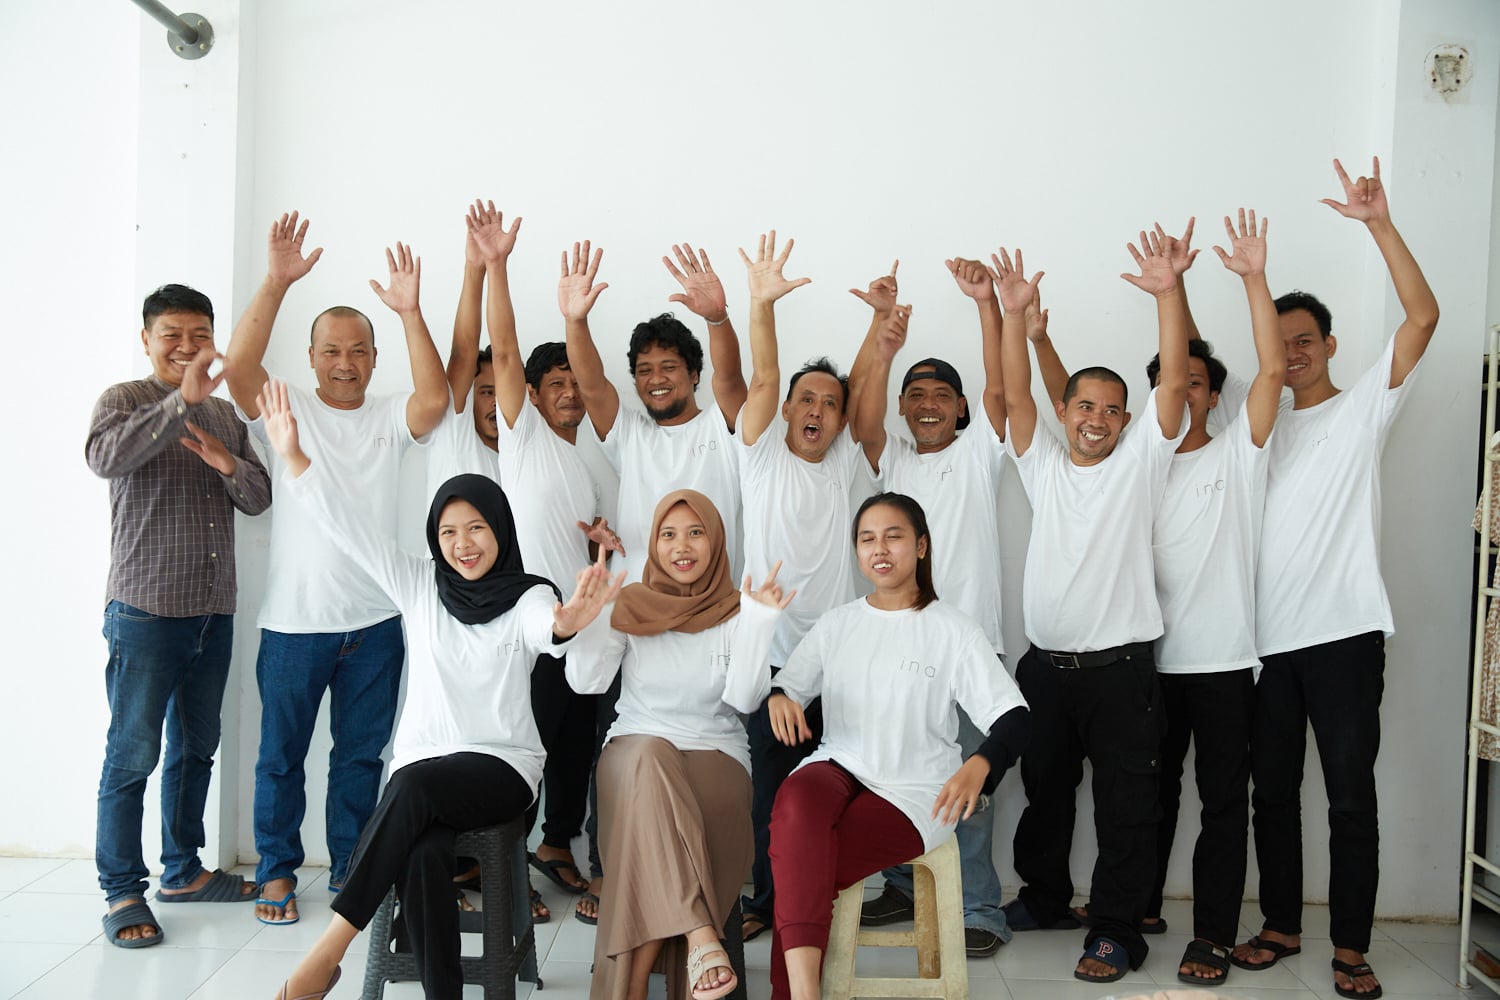 A group of people in white shirts posing for a photo.